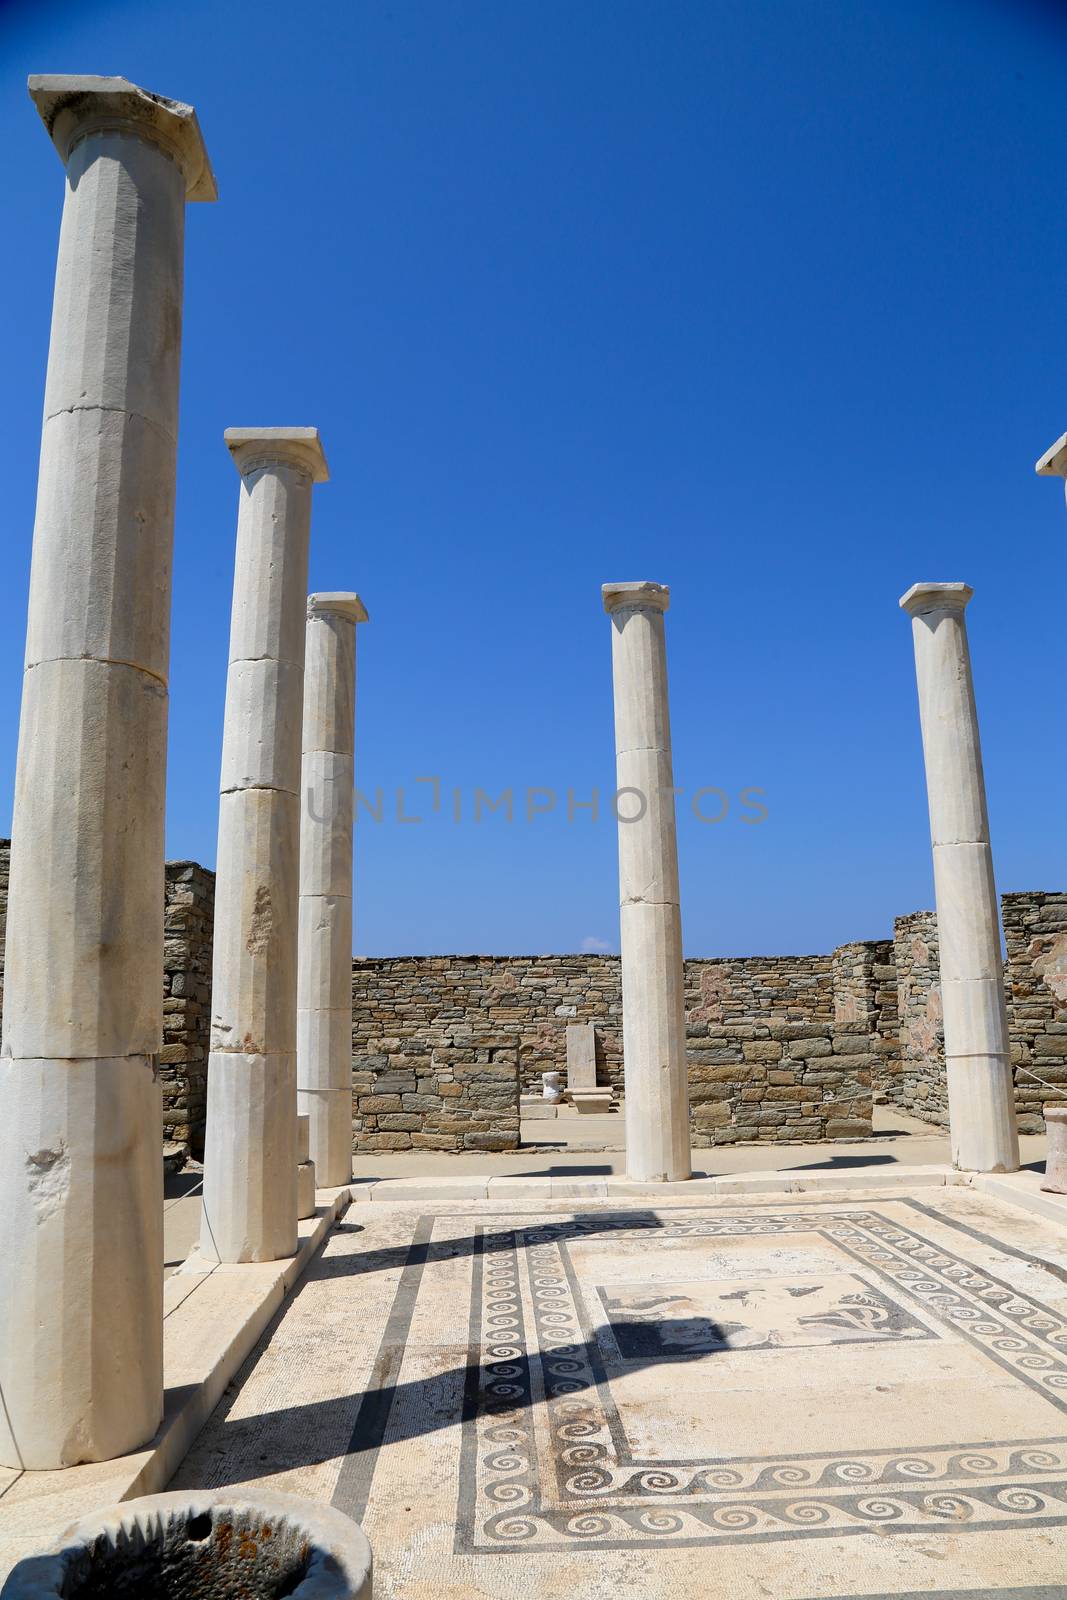 The island of Delos: an important archaeological site in Greece